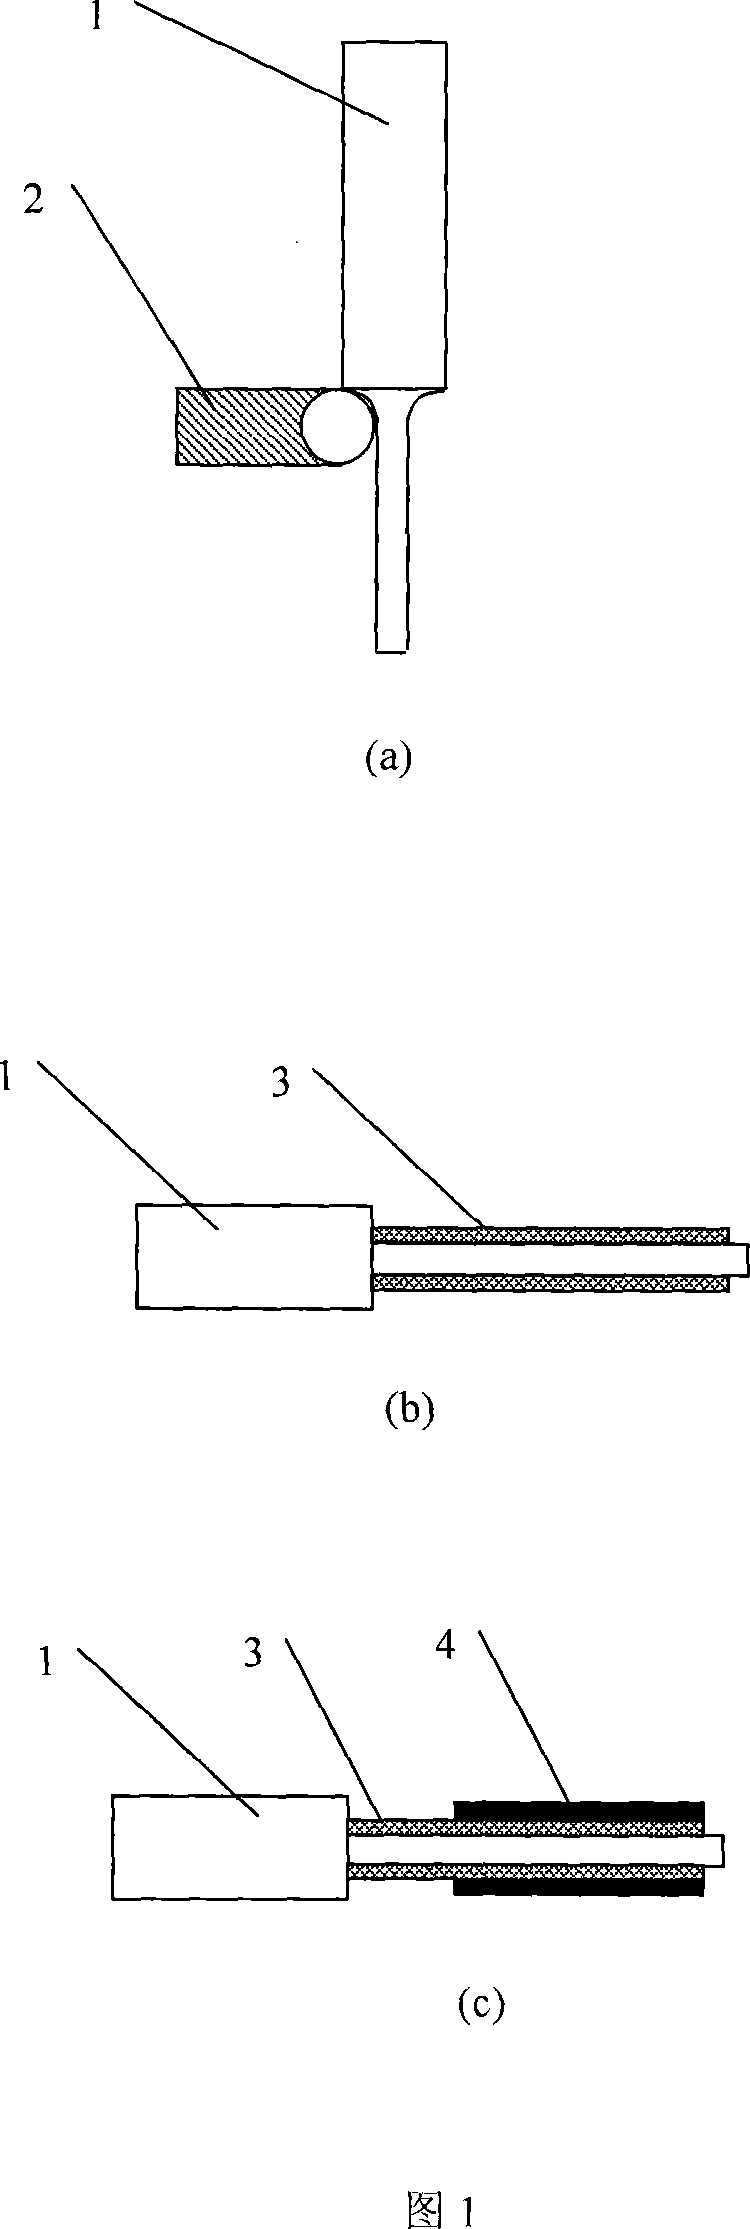 Electrochemical depositer with inductive anode